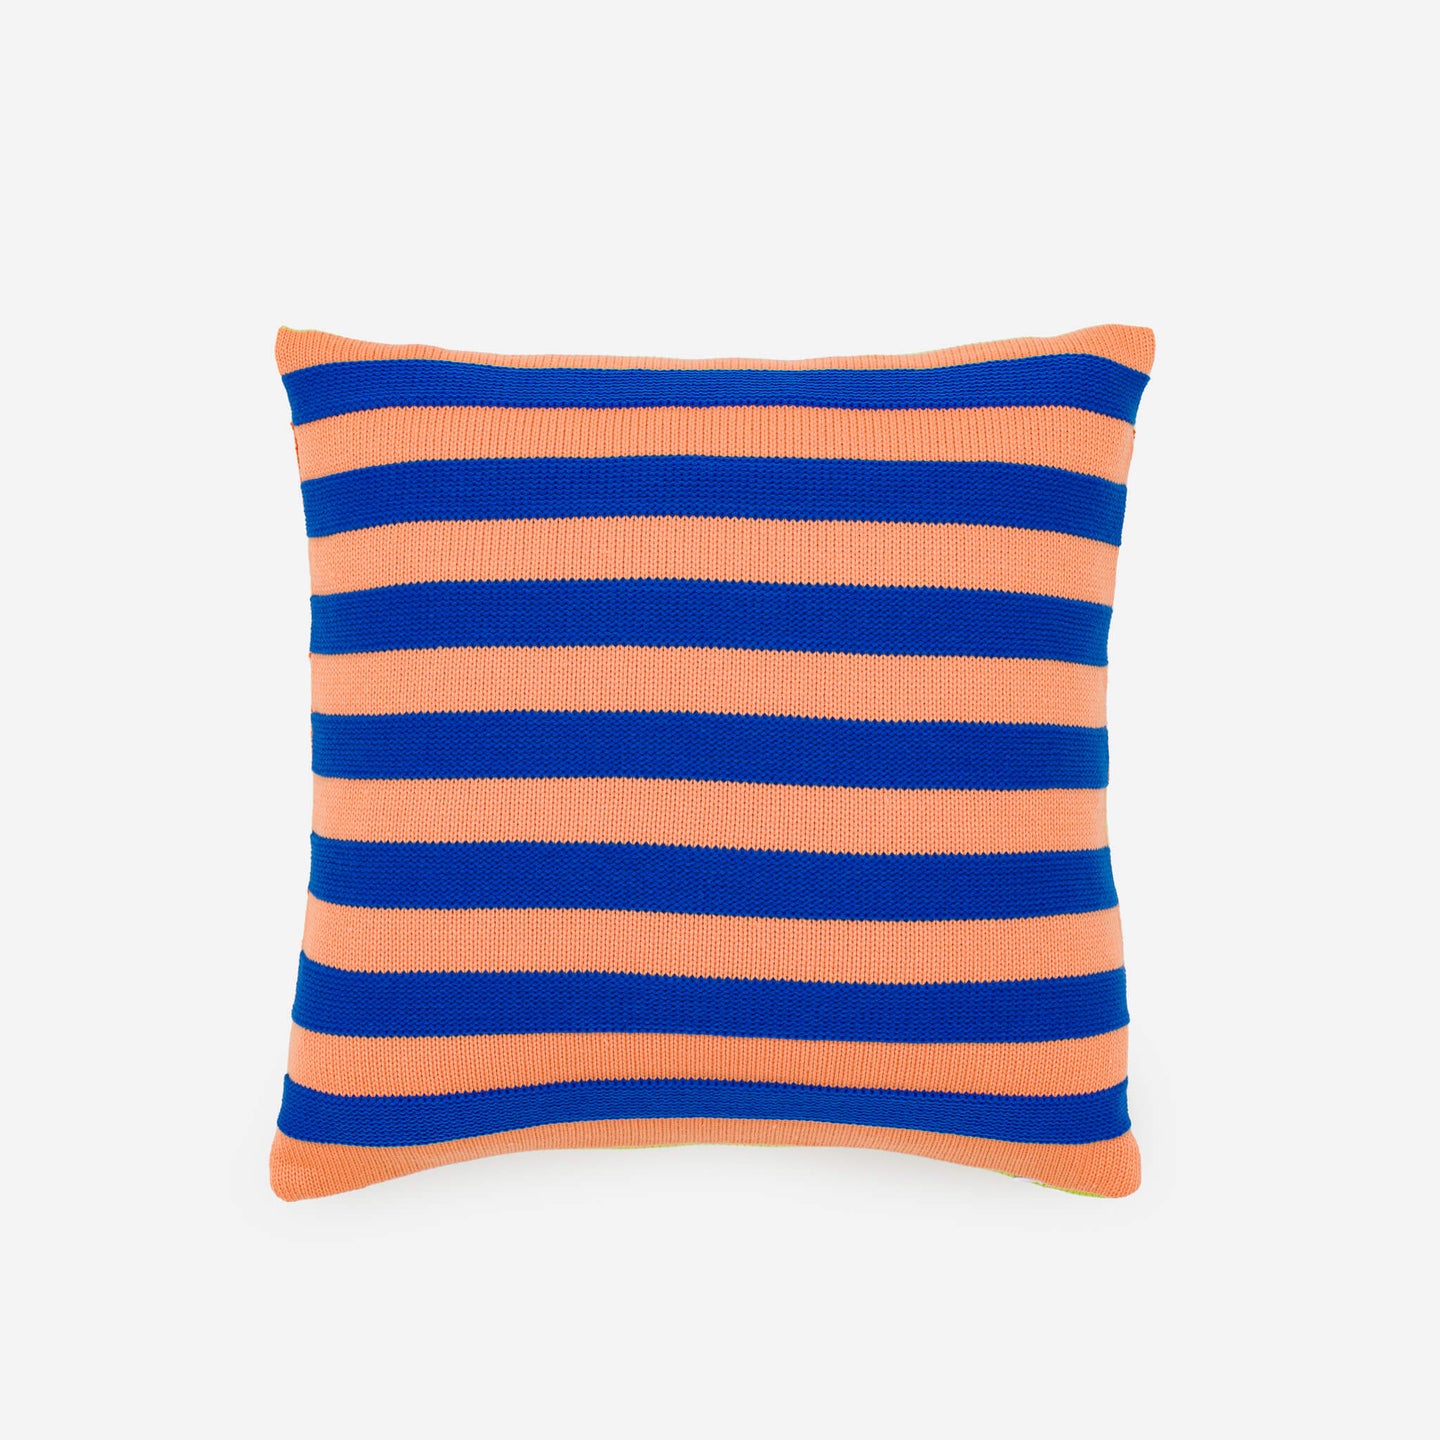 Super Stripe Raised Textured Pillow Cover Accent Colorful Yellow Blue